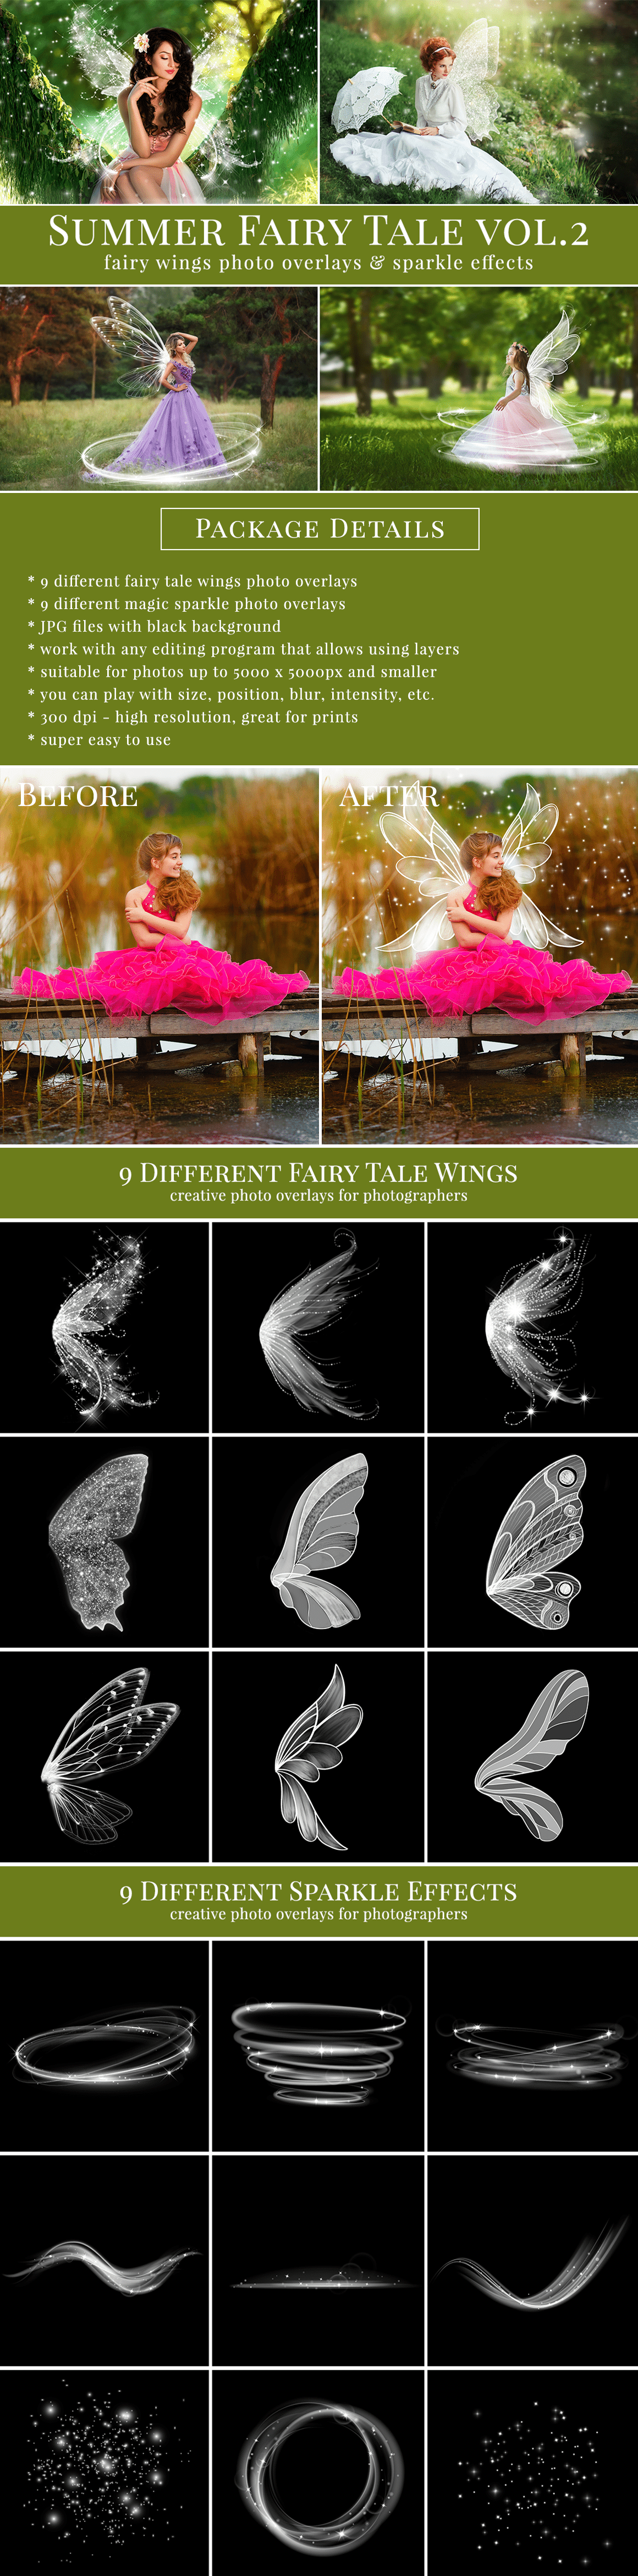 Creative fairy wings photo overlays & sparkle effects, great for fairy mini sessions, summer kids & family pictures, portraits, etc. Tweak your photography and style original scenes with fabulous results, attract more potential clients with original pictures, edited just in few seconds, very easy to use - drag & drop. Work with any editing software that allows using layers – like Adobe Photoshop CS & CC, Elements, Canva, Zoner, Gimp, PicMonkey etc.